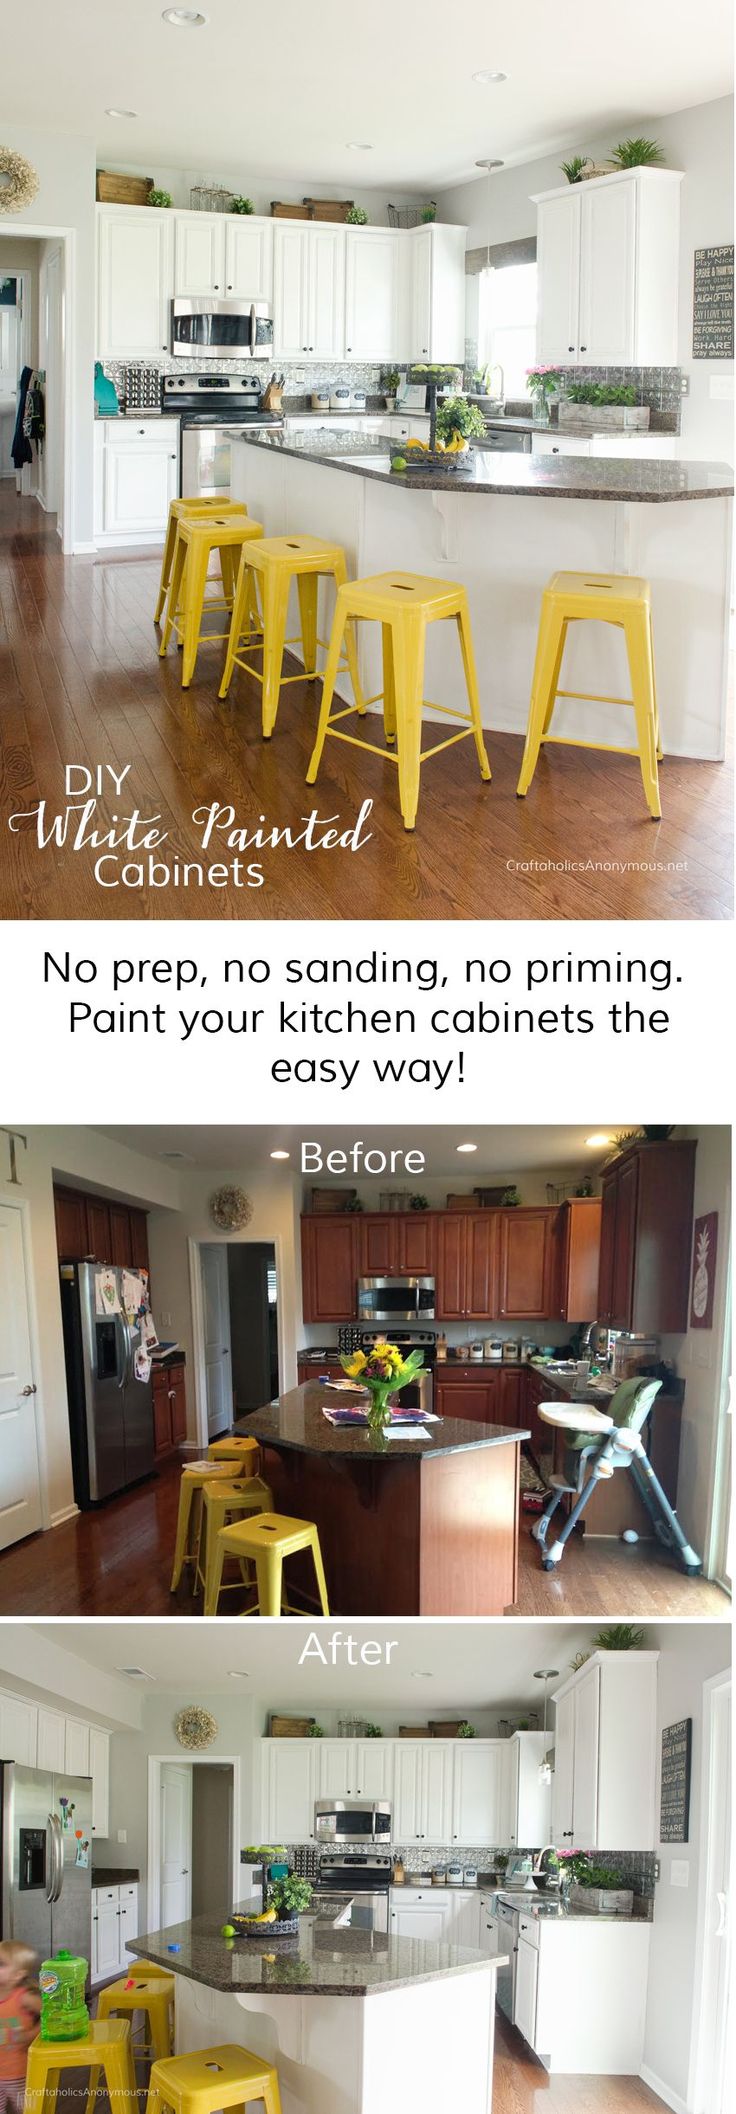 How to Paint Cabinets the easy way! No prep, no priming, no stripping. DIY white...